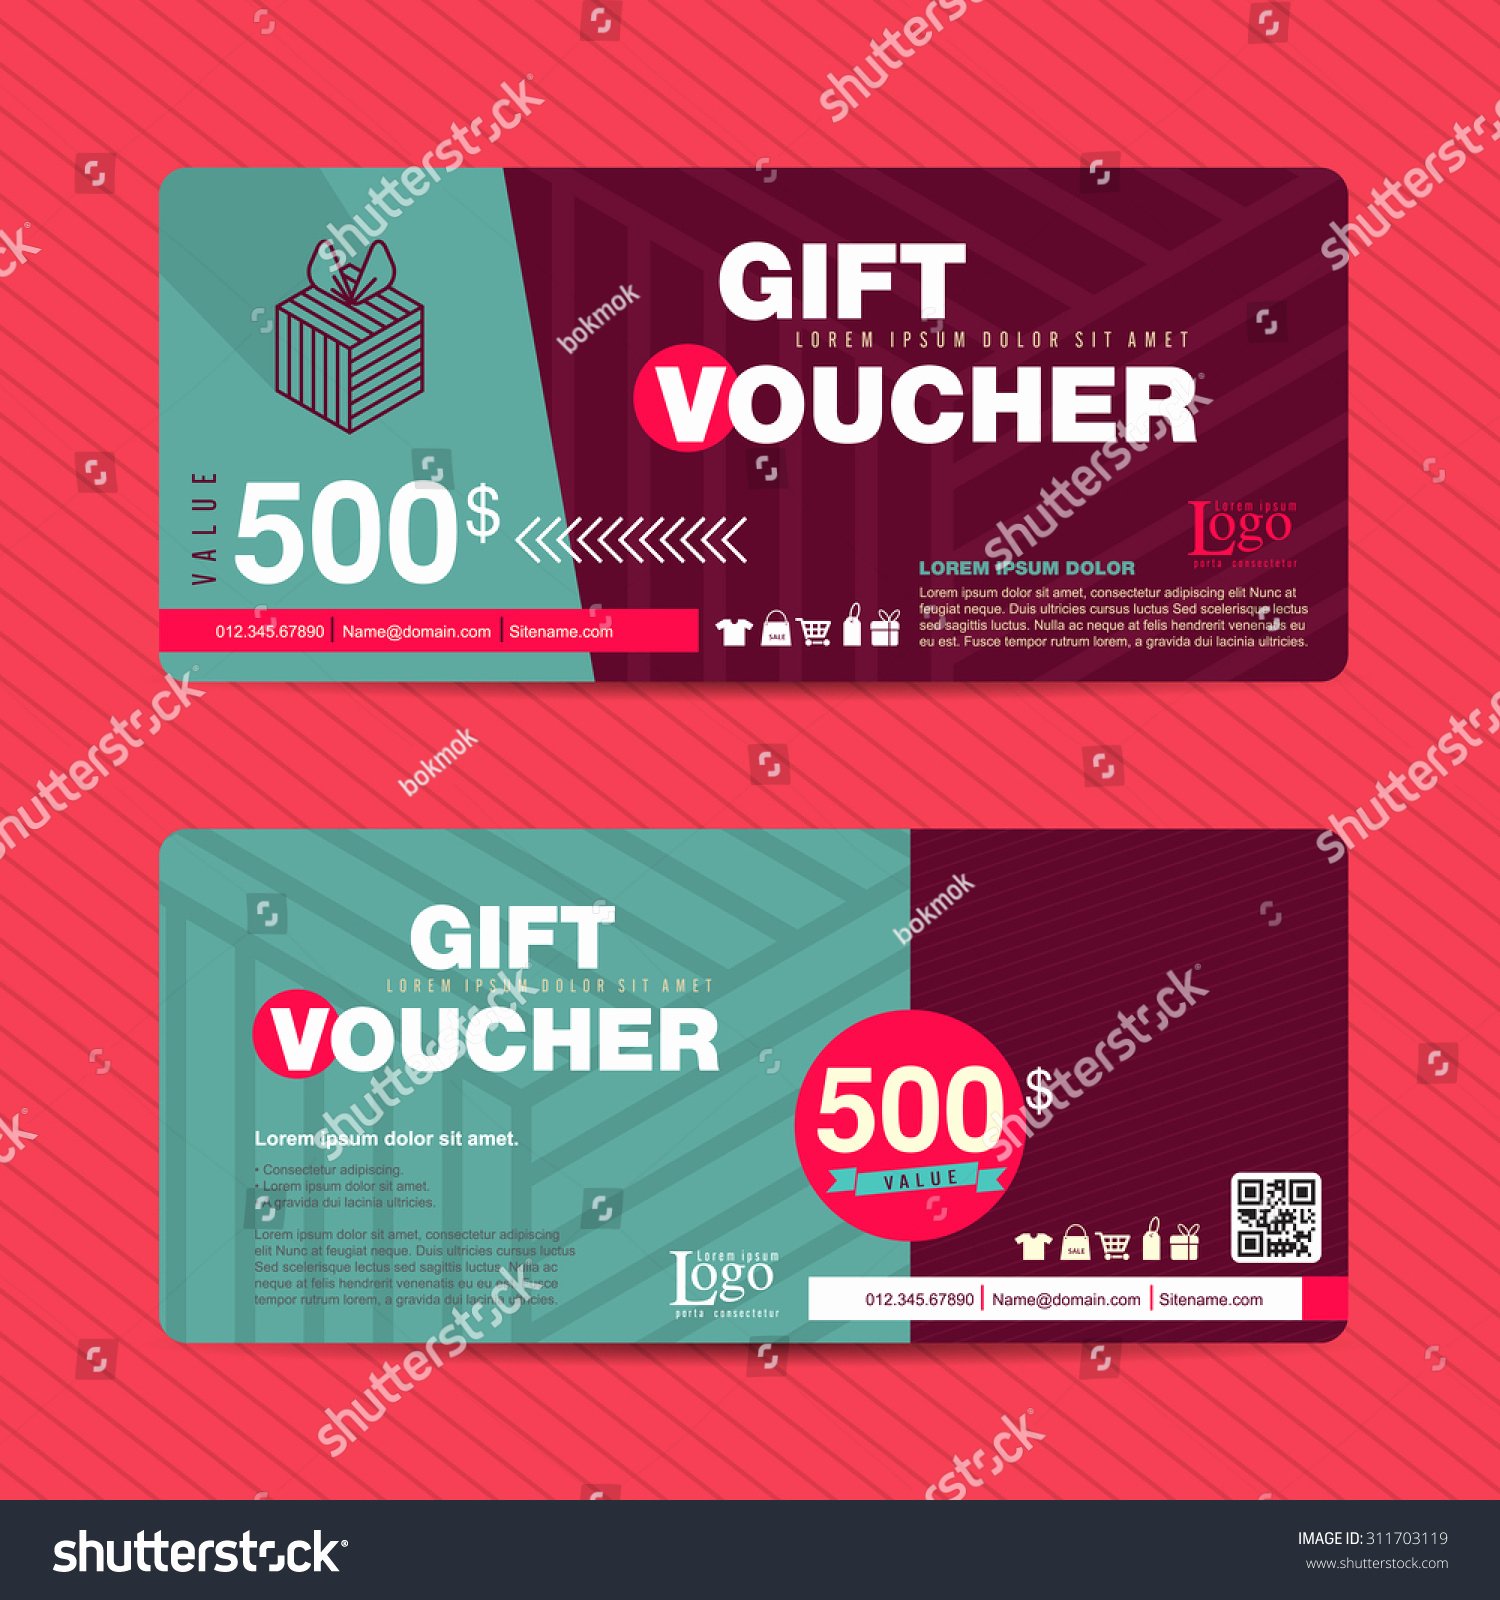 Cute Gift Certificate Template New Vector Illustration Gift Voucher Template with Colorful